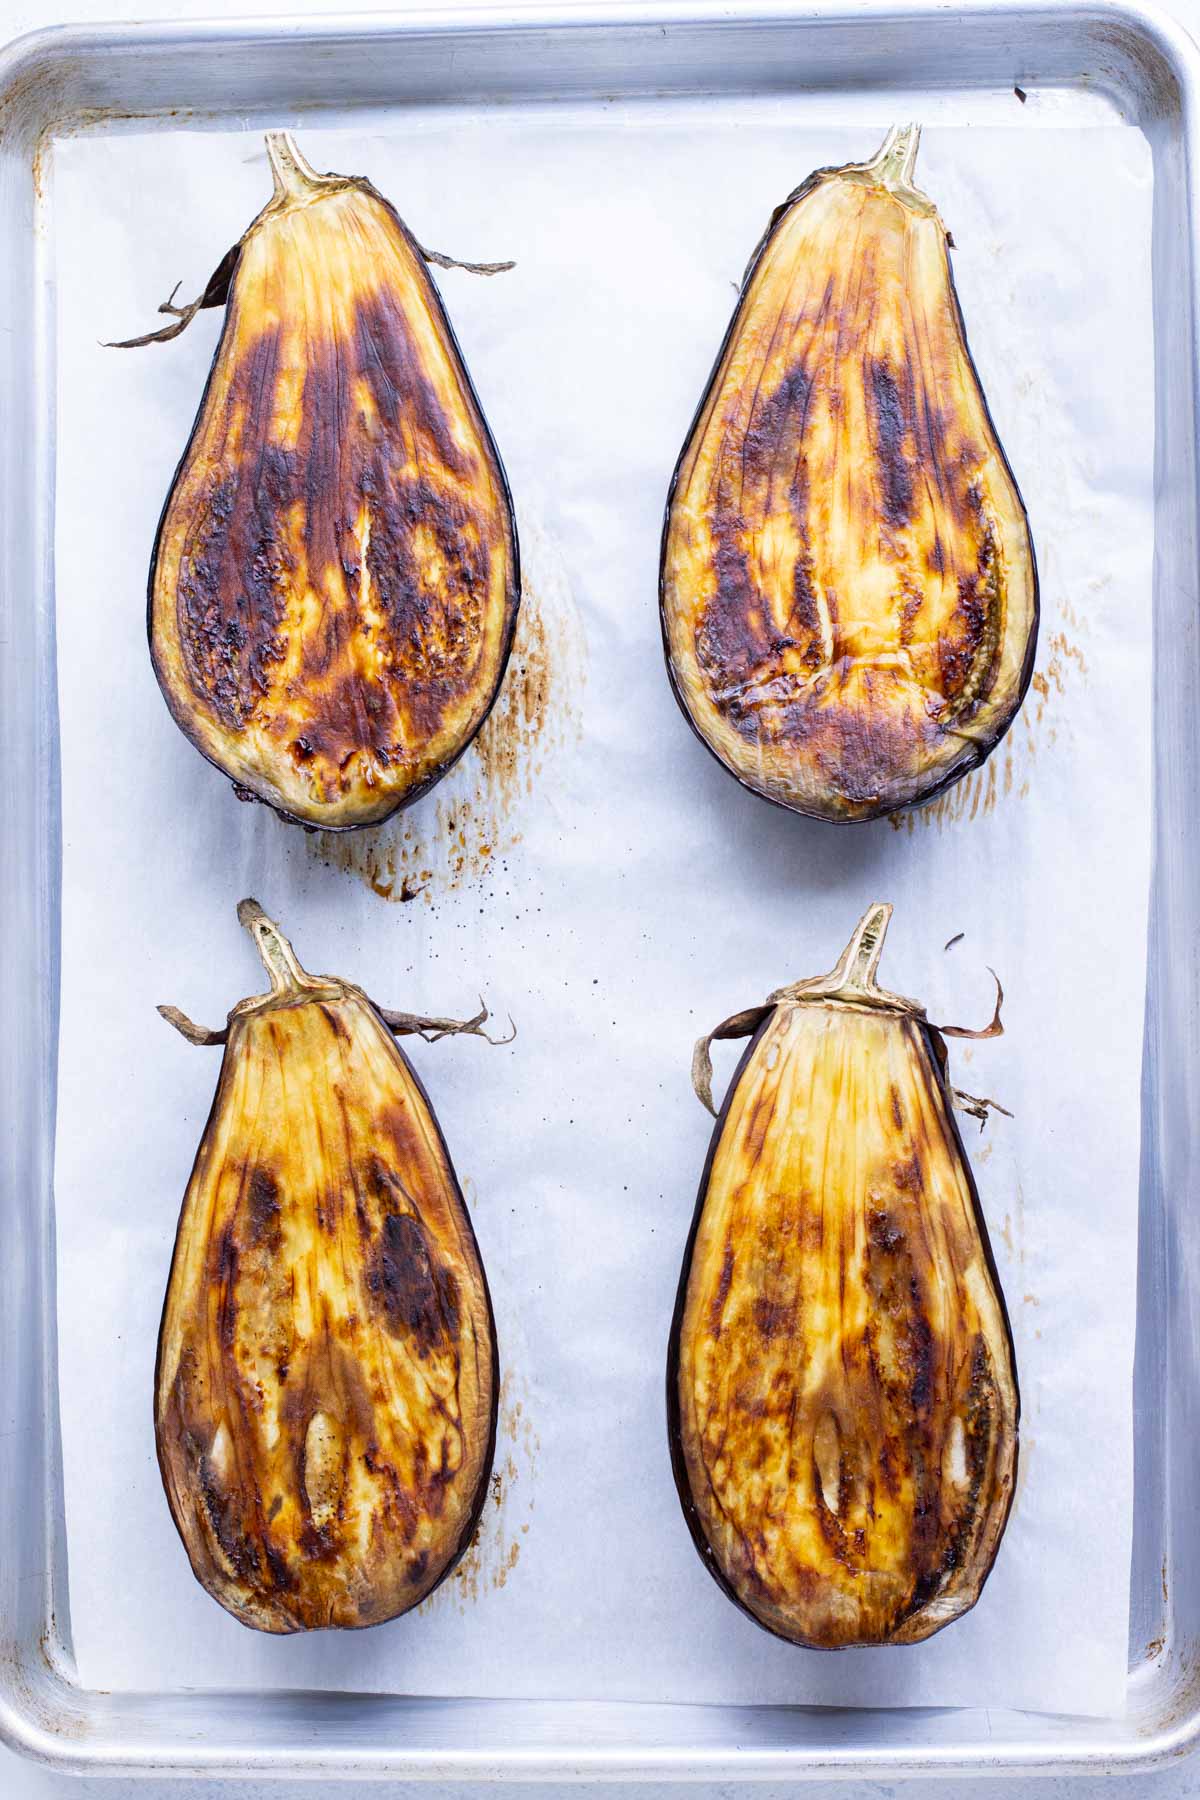 The flesh of the eggplants is golden brown after roasting.